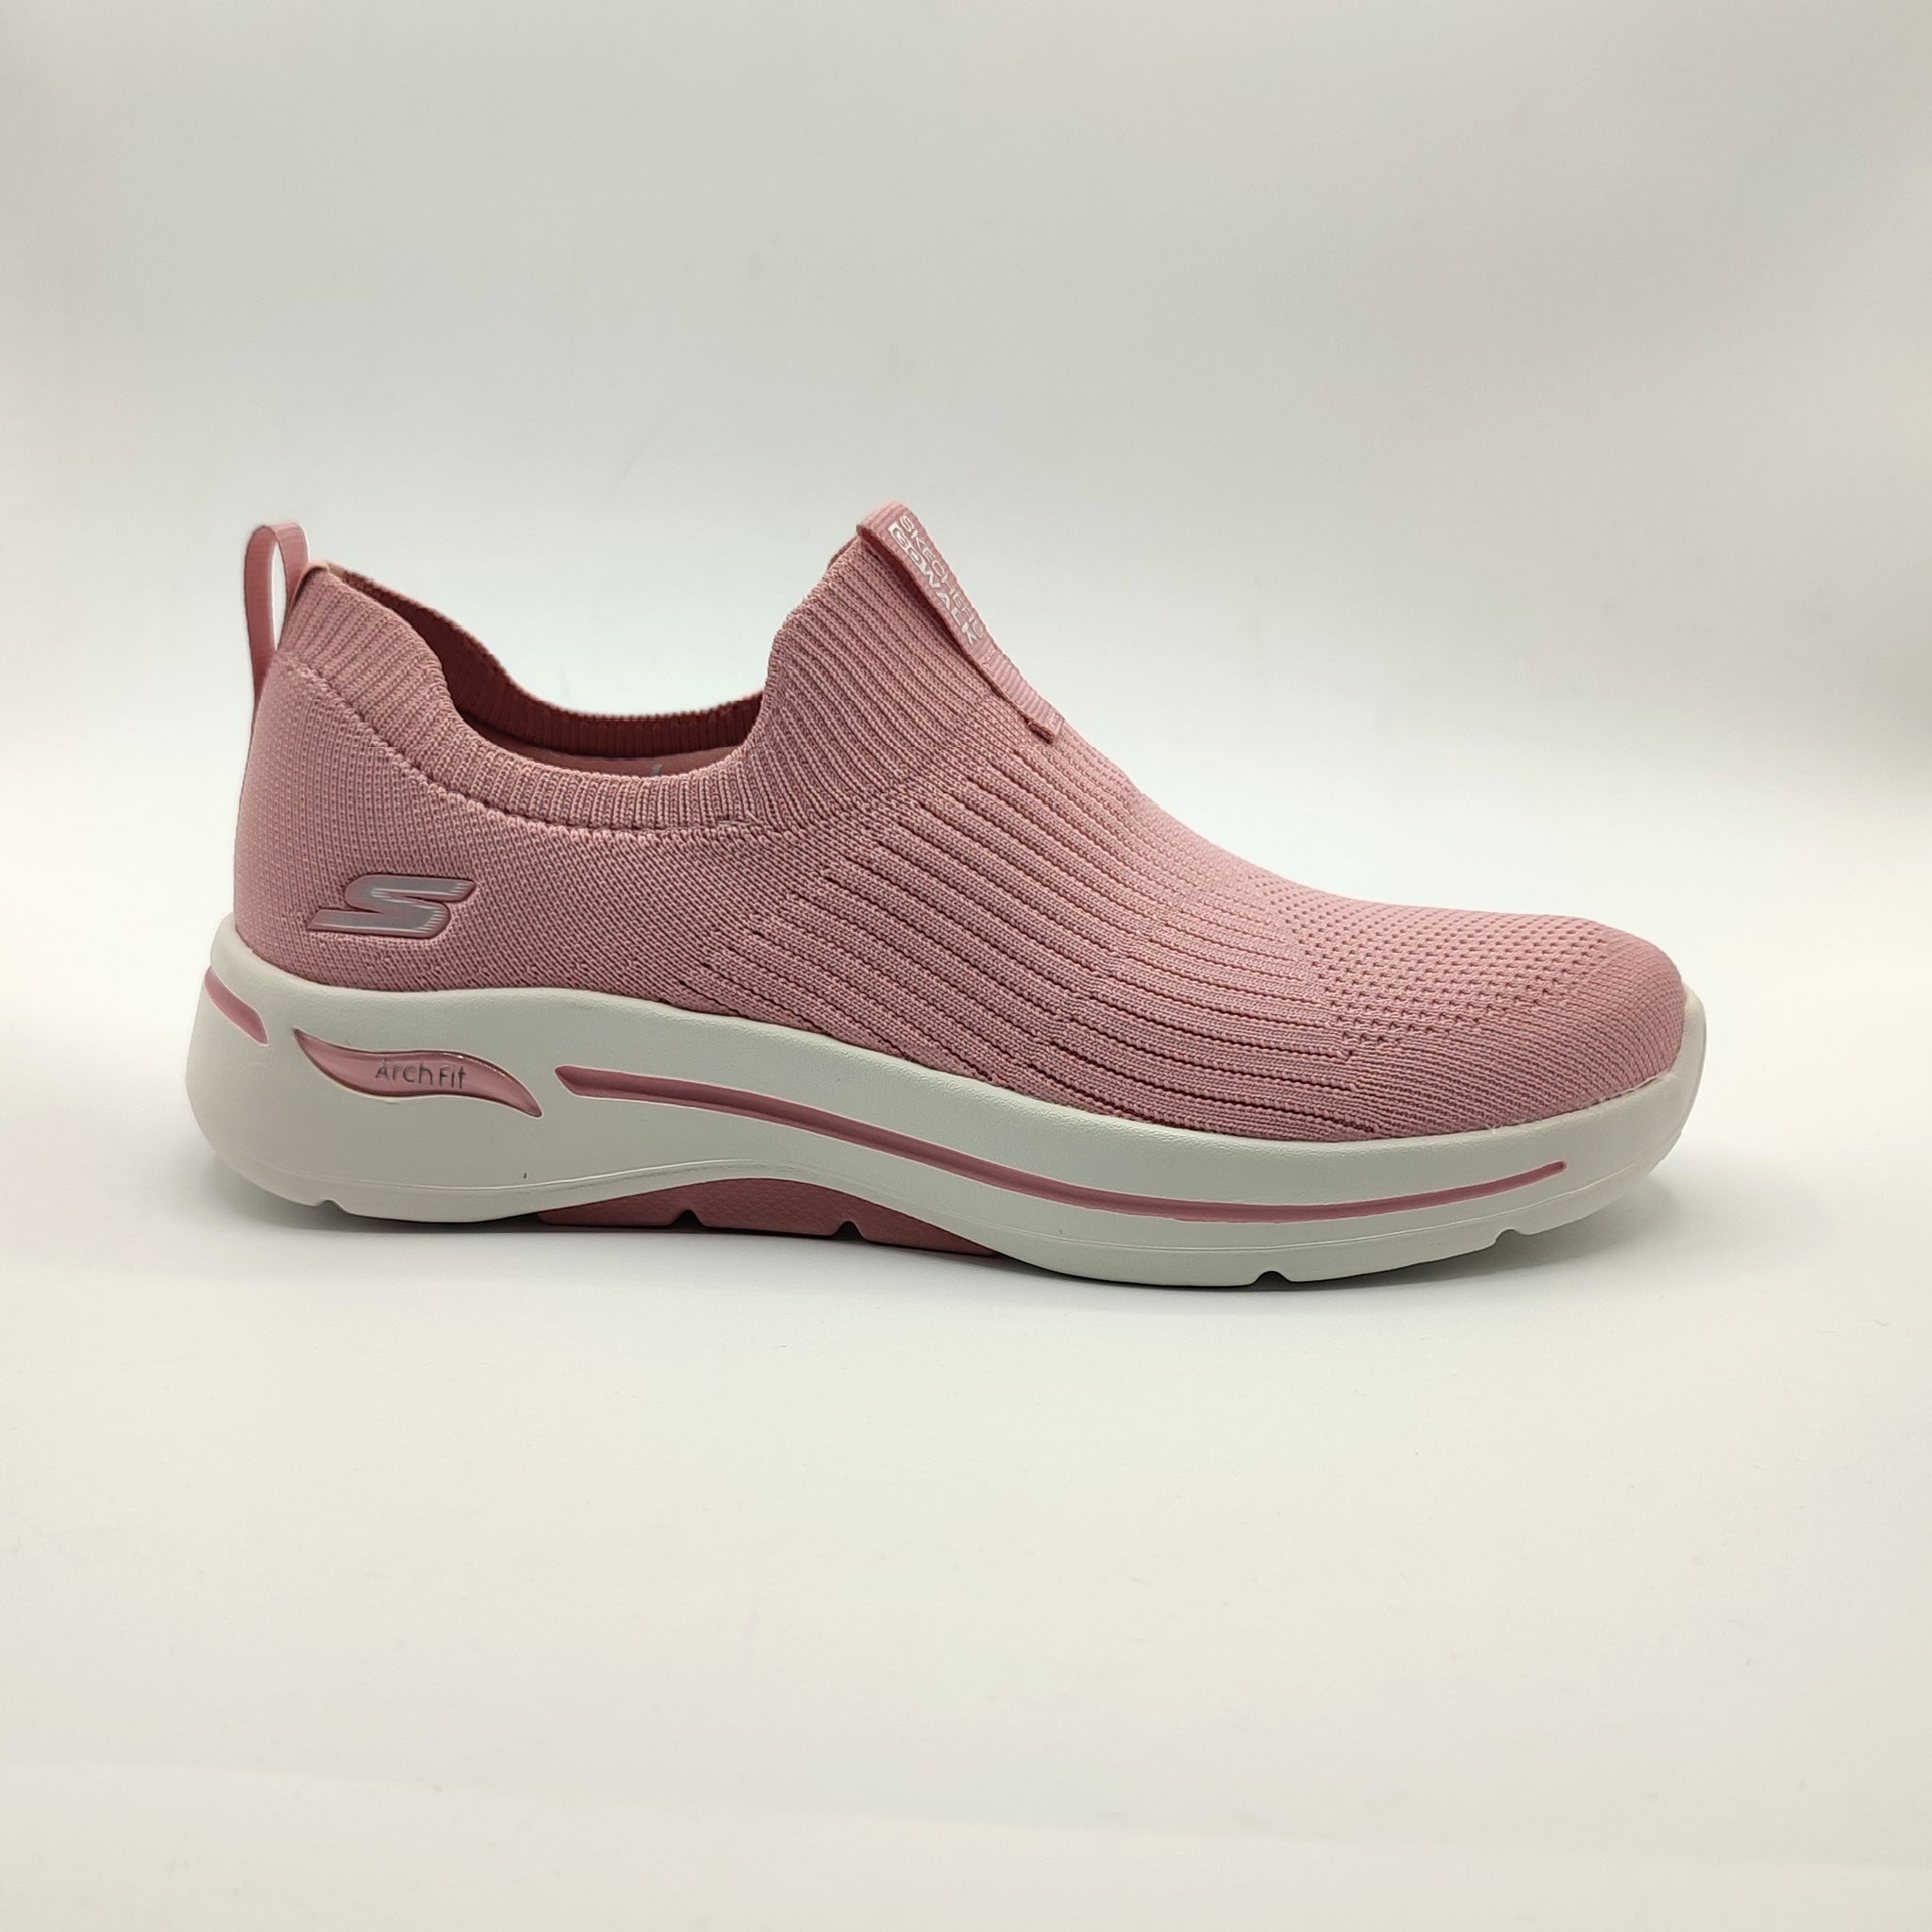 SKECHERS ARCH FIT-ICONIC 124409 lila